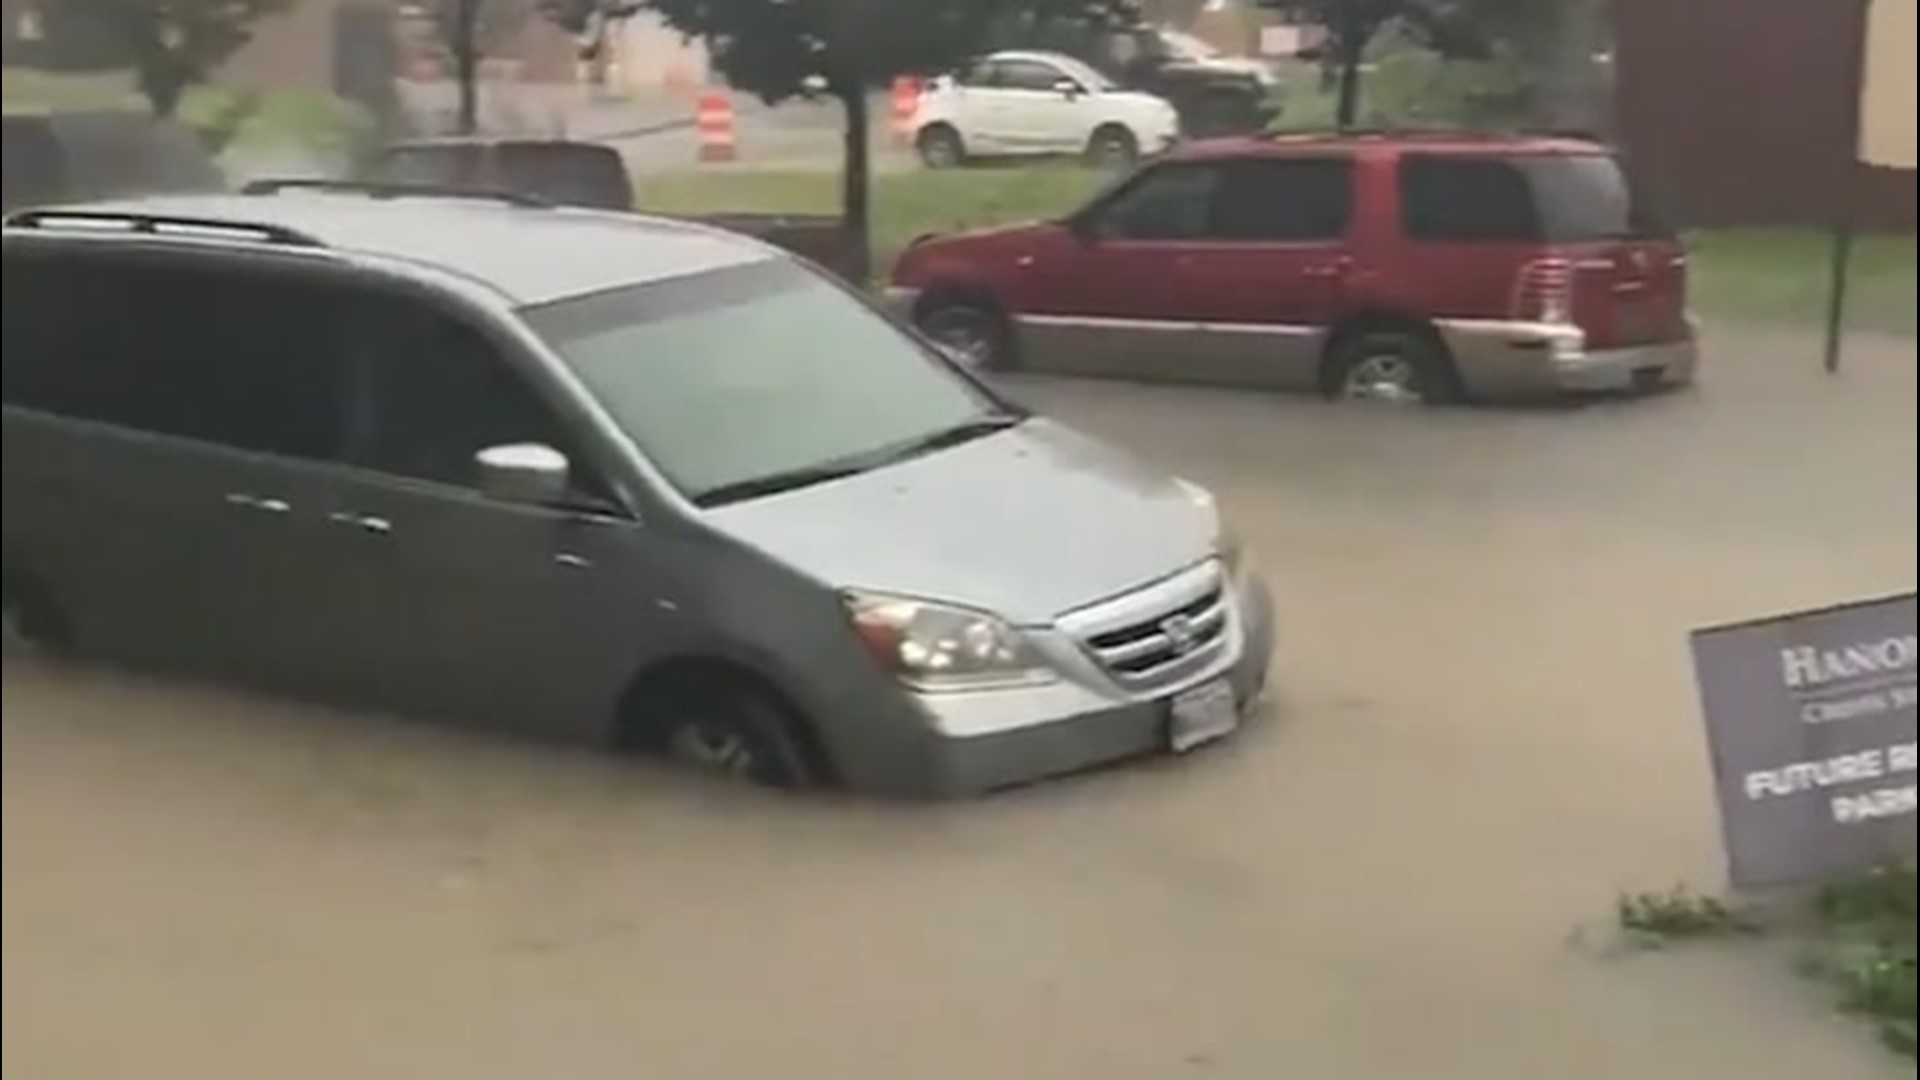 Heavy rain on Aug. 12 caused streets to flood in parts of South Baltimore, Maryland. At the BWI Airport over 3 inches of rain was reported following evening downpours.